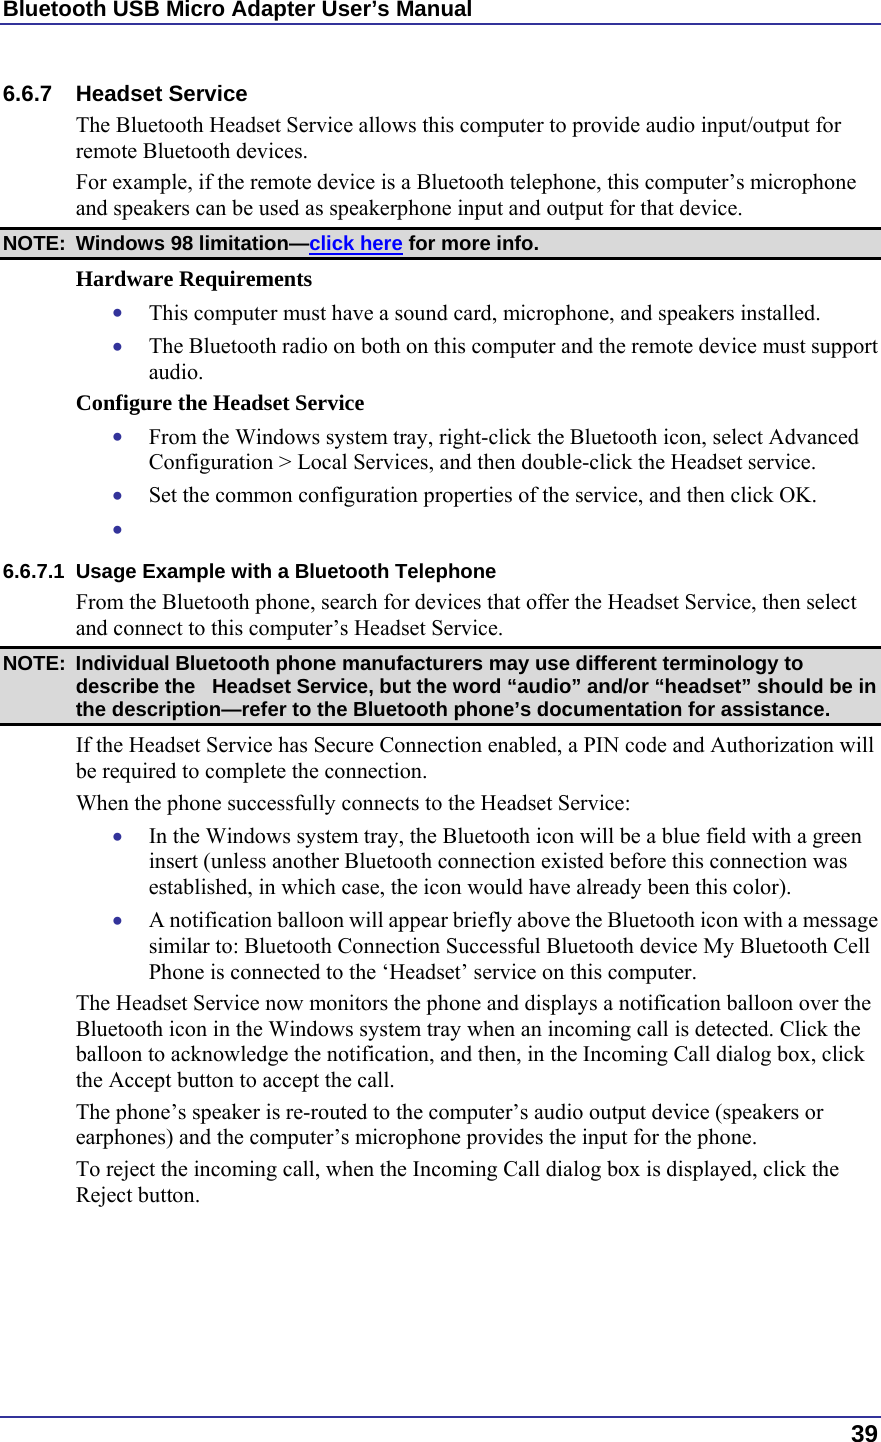 Bluetooth USB Micro Adapter User’s Manual  39 6.6.7 Headset Service The Bluetooth Headset Service allows this computer to provide audio input/output for remote Bluetooth devices. For example, if the remote device is a Bluetooth telephone, this computer’s microphone and speakers can be used as speakerphone input and output for that device. NOTE:  Windows 98 limitation—click here for more info. Hardware Requirements •  This computer must have a sound card, microphone, and speakers installed. •  The Bluetooth radio on both on this computer and the remote device must support audio. Configure the Headset Service •  From the Windows system tray, right-click the Bluetooth icon, select Advanced Configuration &gt; Local Services, and then double-click the Headset service. •  Set the common configuration properties of the service, and then click OK. •   6.6.7.1  Usage Example with a Bluetooth Telephone From the Bluetooth phone, search for devices that offer the Headset Service, then select and connect to this computer’s Headset Service. NOTE:  Individual Bluetooth phone manufacturers may use different terminology to describe the   Headset Service, but the word “audio” and/or “headset” should be in the description—refer to the Bluetooth phone’s documentation for assistance. If the Headset Service has Secure Connection enabled, a PIN code and Authorization will be required to complete the connection. When the phone successfully connects to the Headset Service: •  In the Windows system tray, the Bluetooth icon will be a blue field with a green insert (unless another Bluetooth connection existed before this connection was established, in which case, the icon would have already been this color). •  A notification balloon will appear briefly above the Bluetooth icon with a message similar to: Bluetooth Connection Successful Bluetooth device My Bluetooth Cell Phone is connected to the ‘Headset’ service on this computer. The Headset Service now monitors the phone and displays a notification balloon over the Bluetooth icon in the Windows system tray when an incoming call is detected. Click the balloon to acknowledge the notification, and then, in the Incoming Call dialog box, click the Accept button to accept the call. The phone’s speaker is re-routed to the computer’s audio output device (speakers or earphones) and the computer’s microphone provides the input for the phone. To reject the incoming call, when the Incoming Call dialog box is displayed, click the Reject button. 